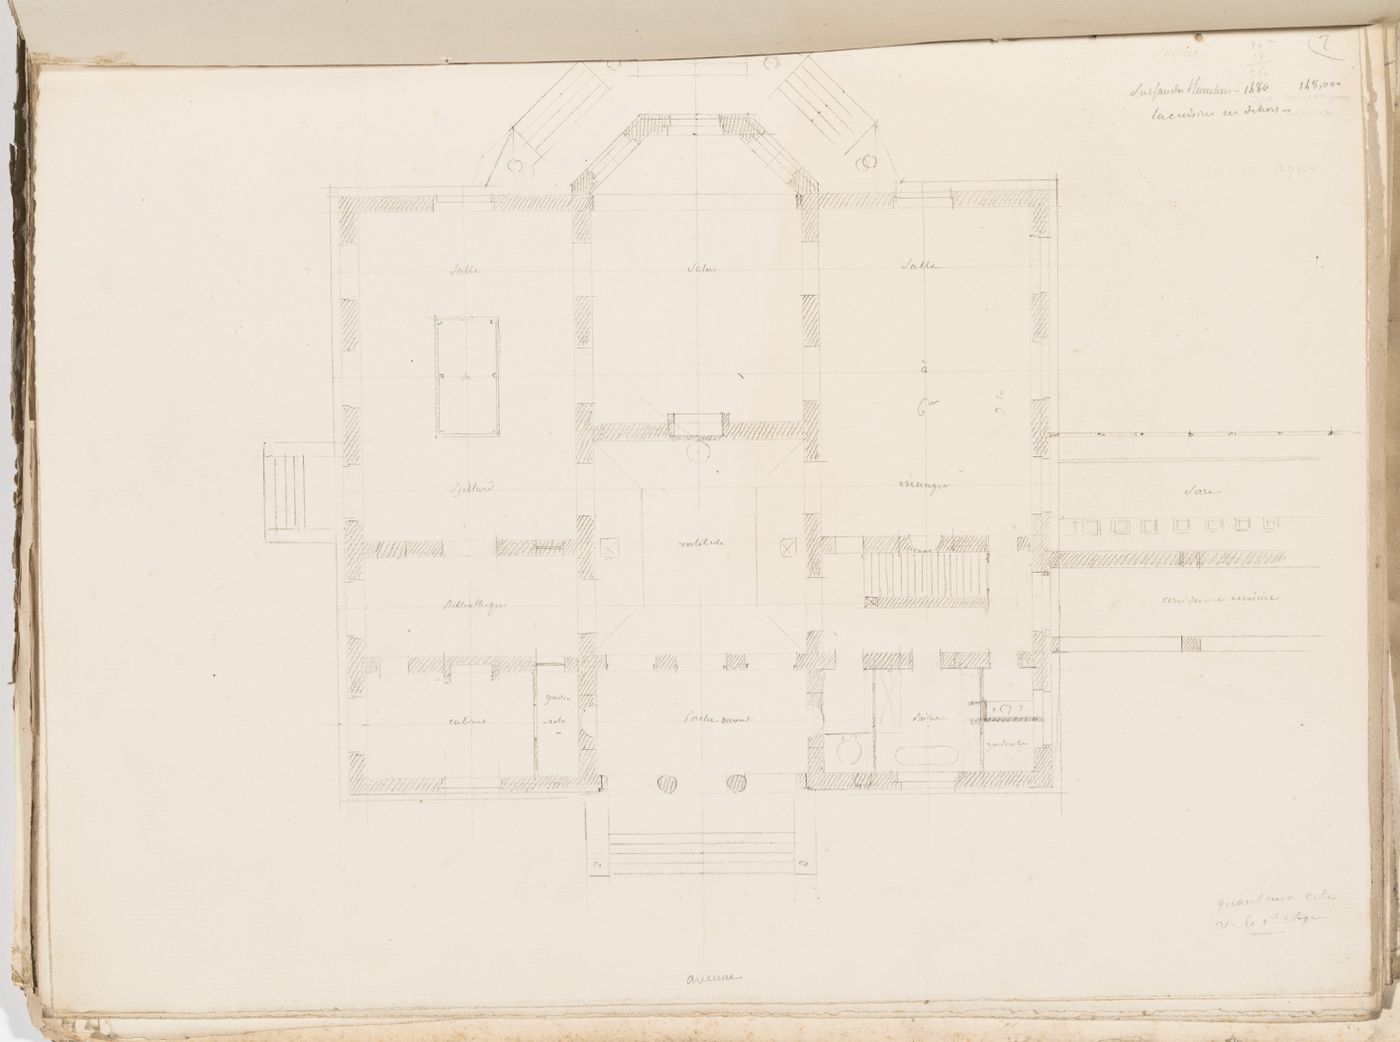 Project no. 2 for a country house for comte Treilhard: Ground floor plan